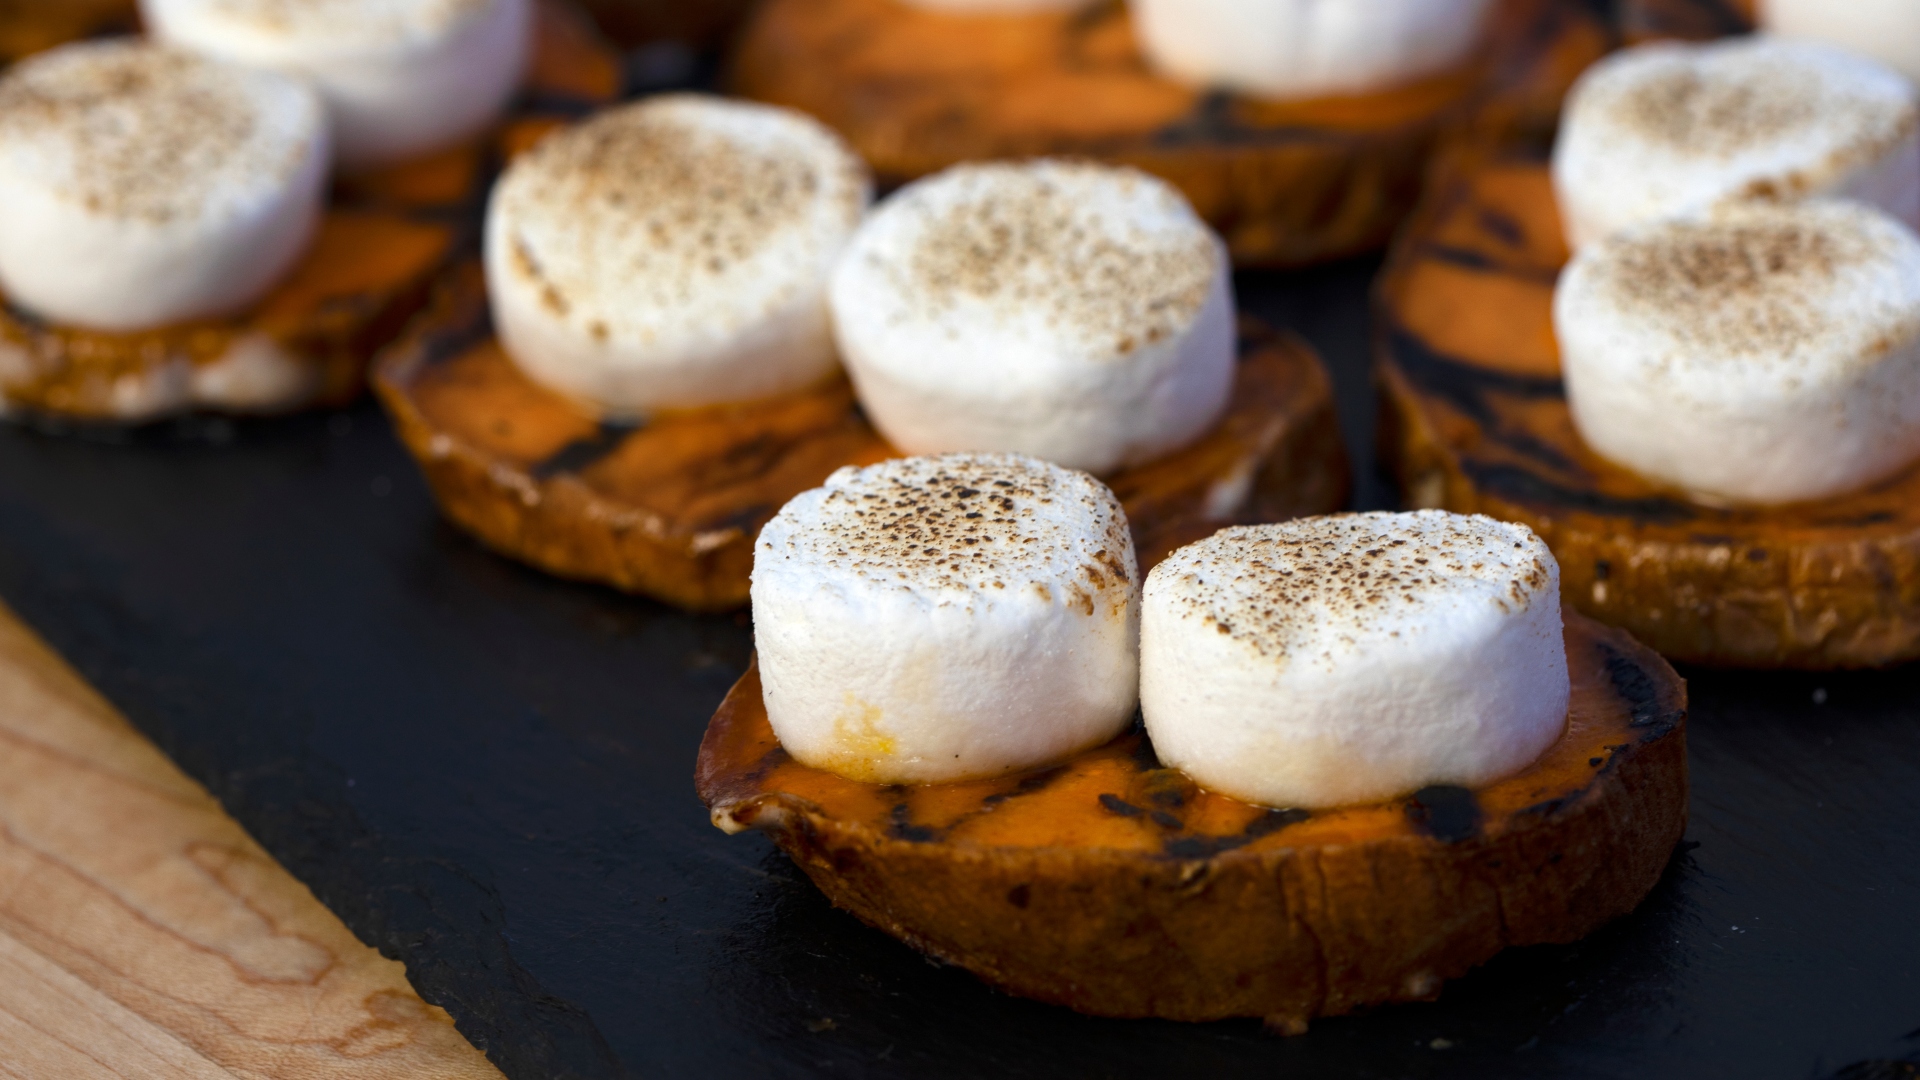 Grilled sweet potato with marshmallow